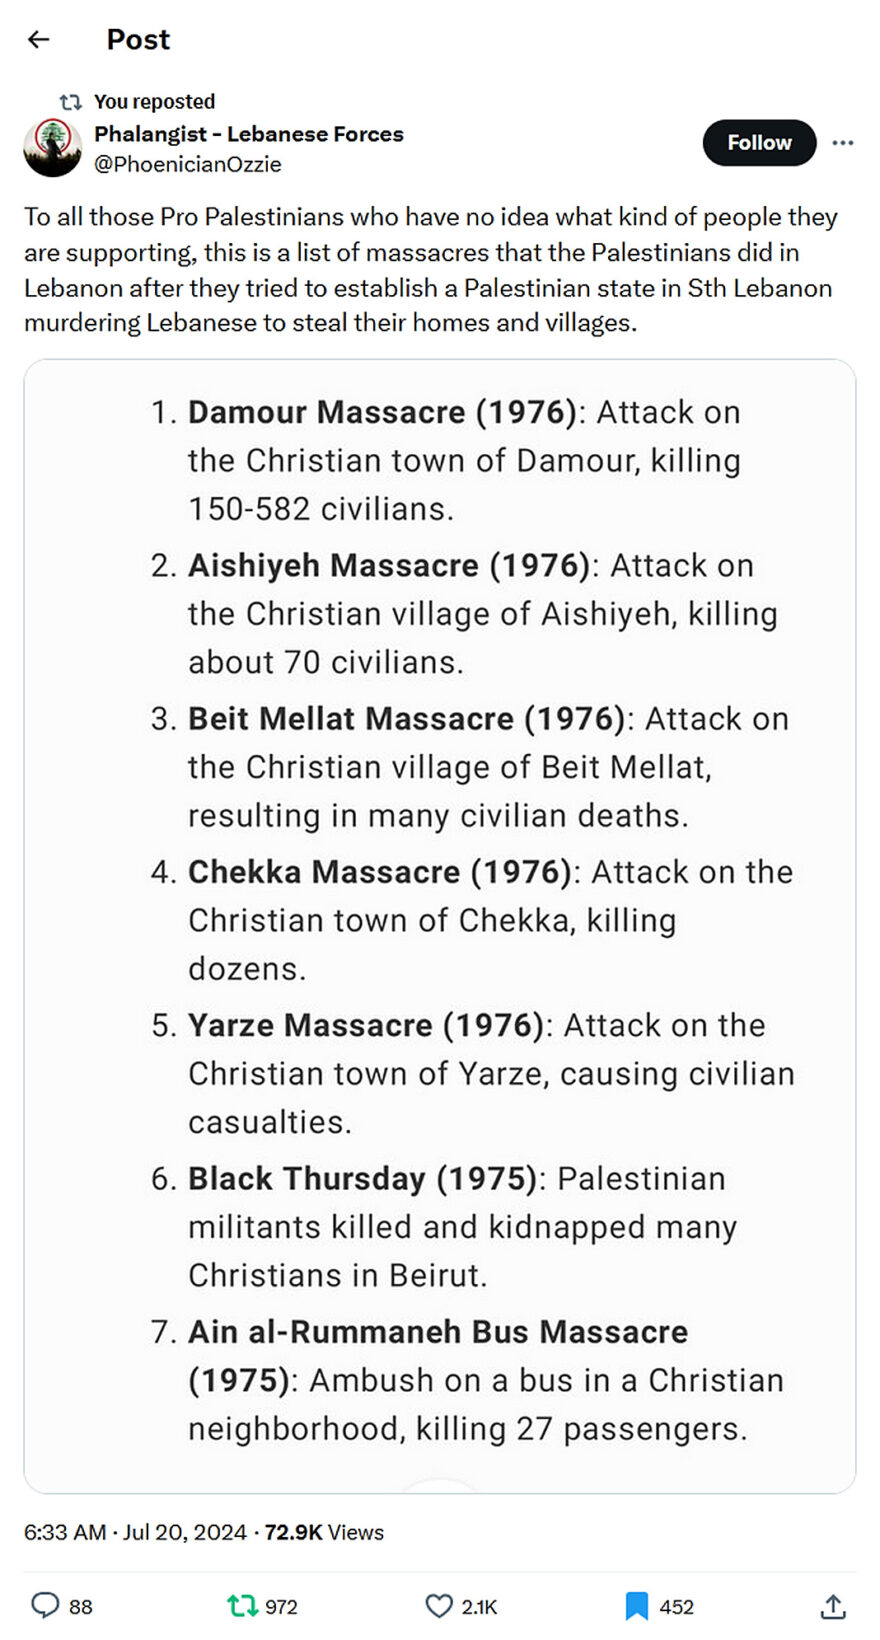 Phalangist - Lebanese Forces-tweet-20July2024-List of massacres that the Palestinians did in Lebanon